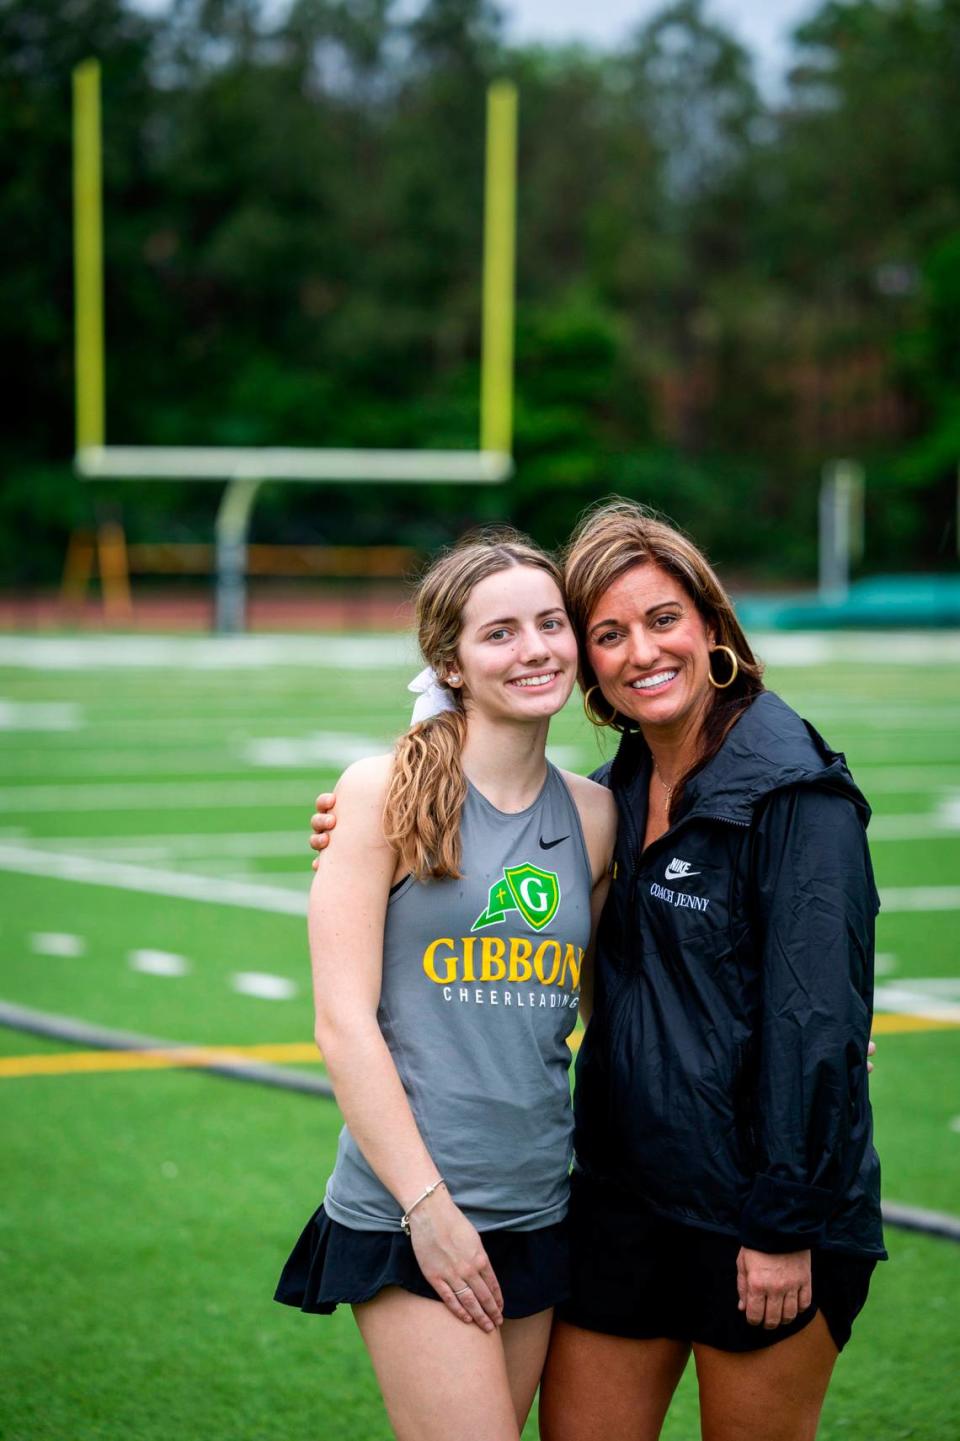 Coach Jennifer Marks and her daughter Ava Marks of the Cardinal Gibbons’ cheerleading squad.